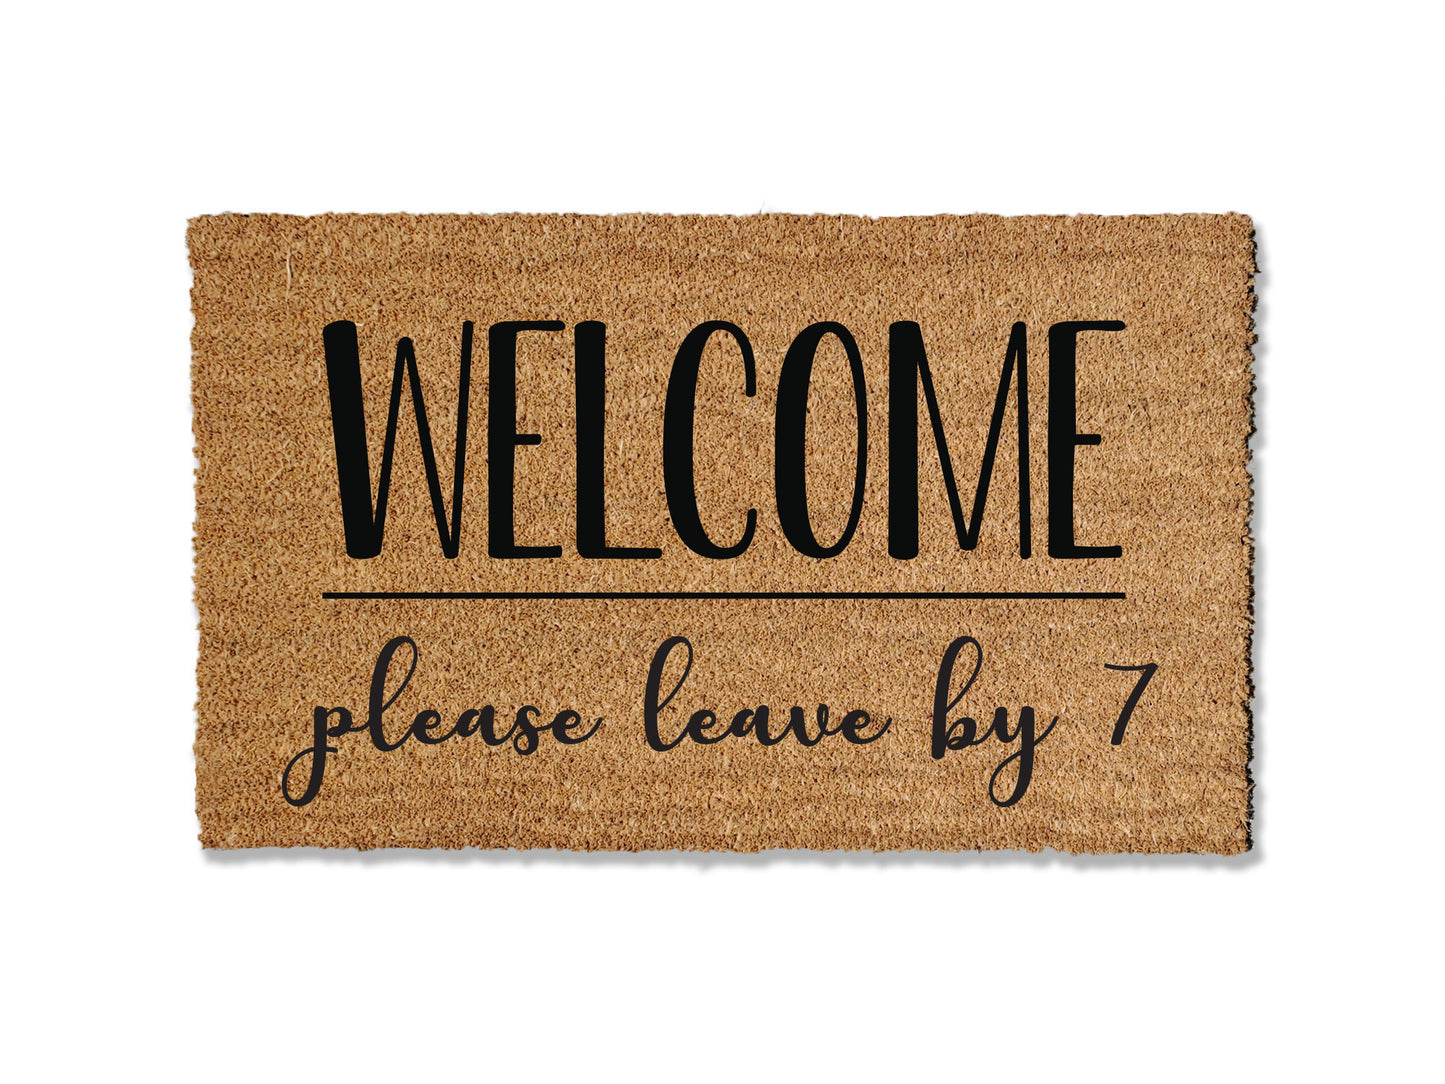 Welcome, Please leave by 7, 8, 9, 10